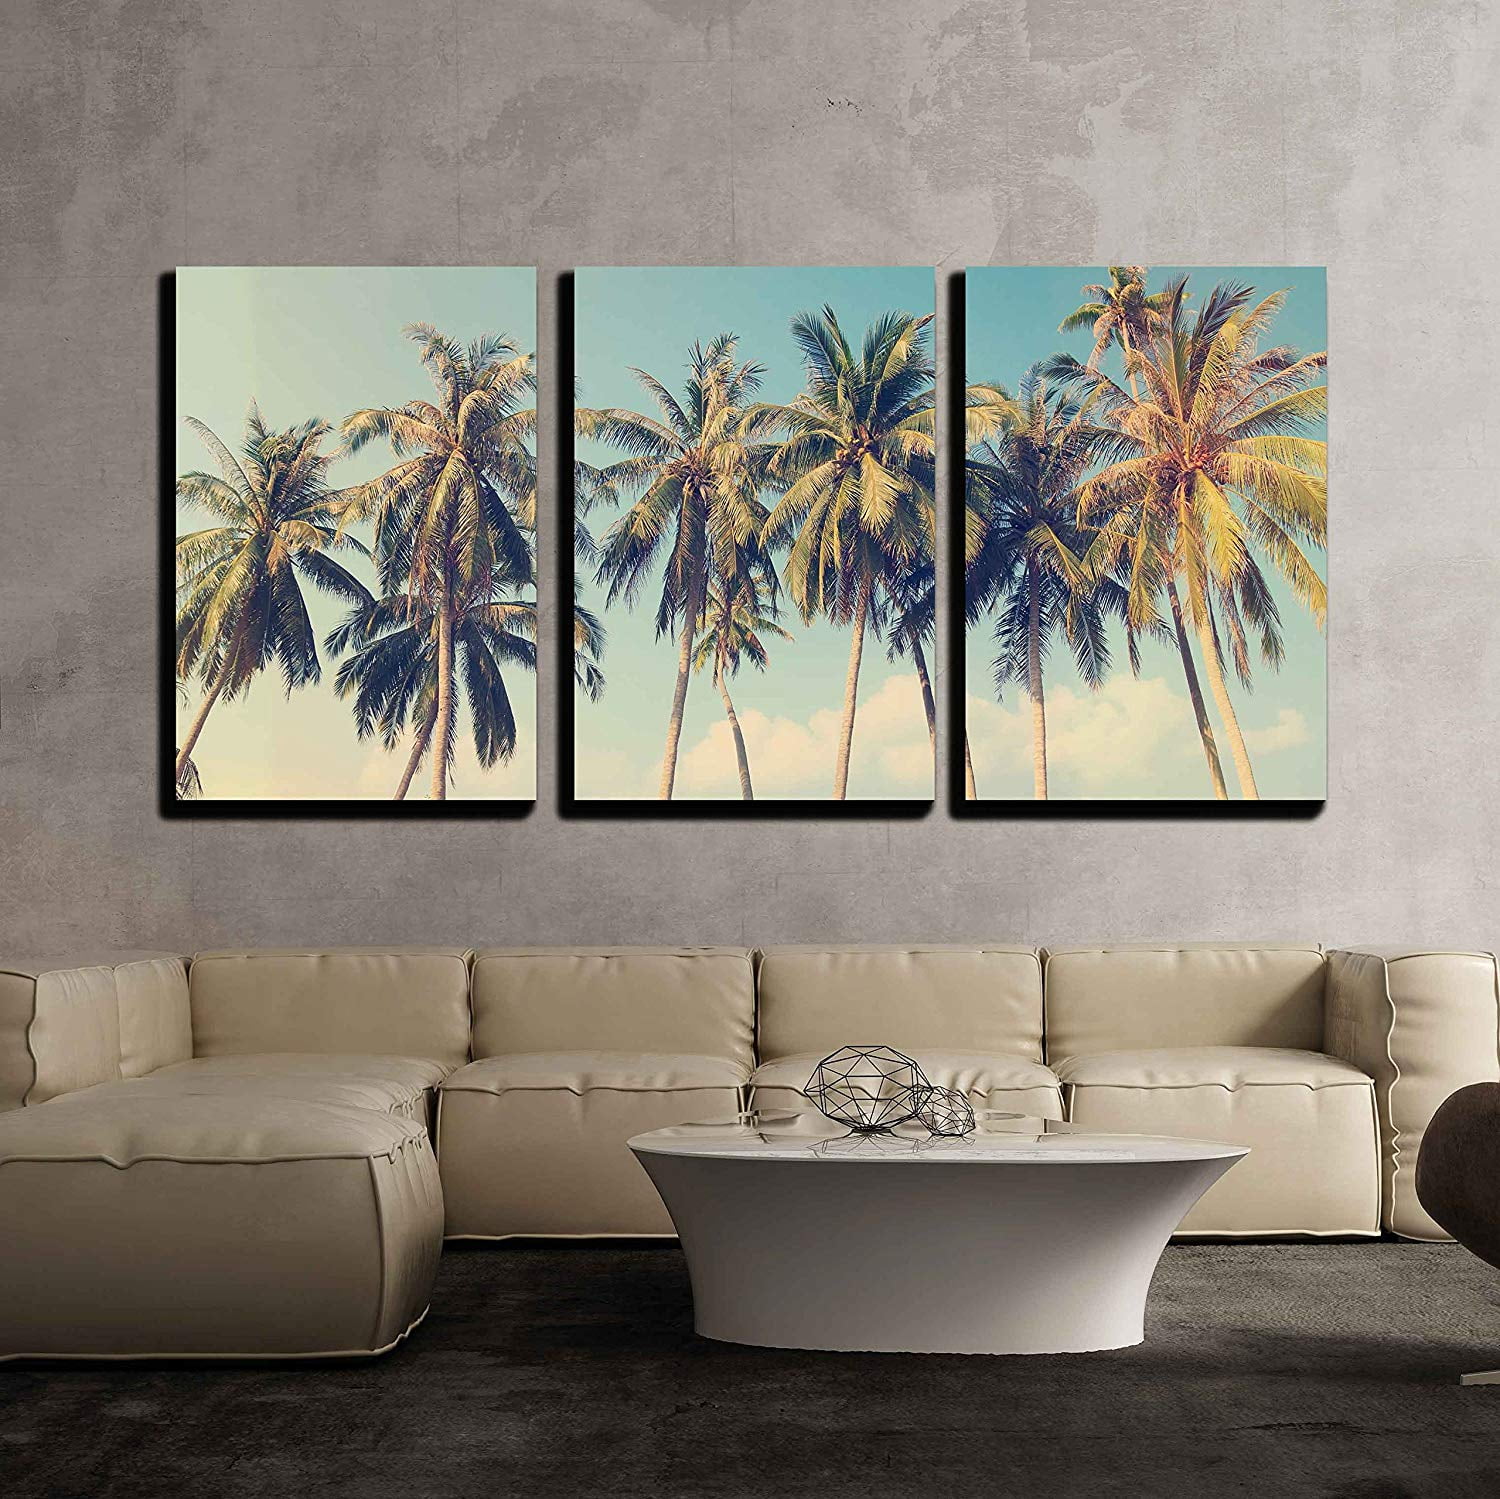 Wall26 3 Piece Canvas Wall Art - Vintage Tropical Palm Trees on a Beach -  Modern Home Decor Stretched and Framed Ready to Hang - 16